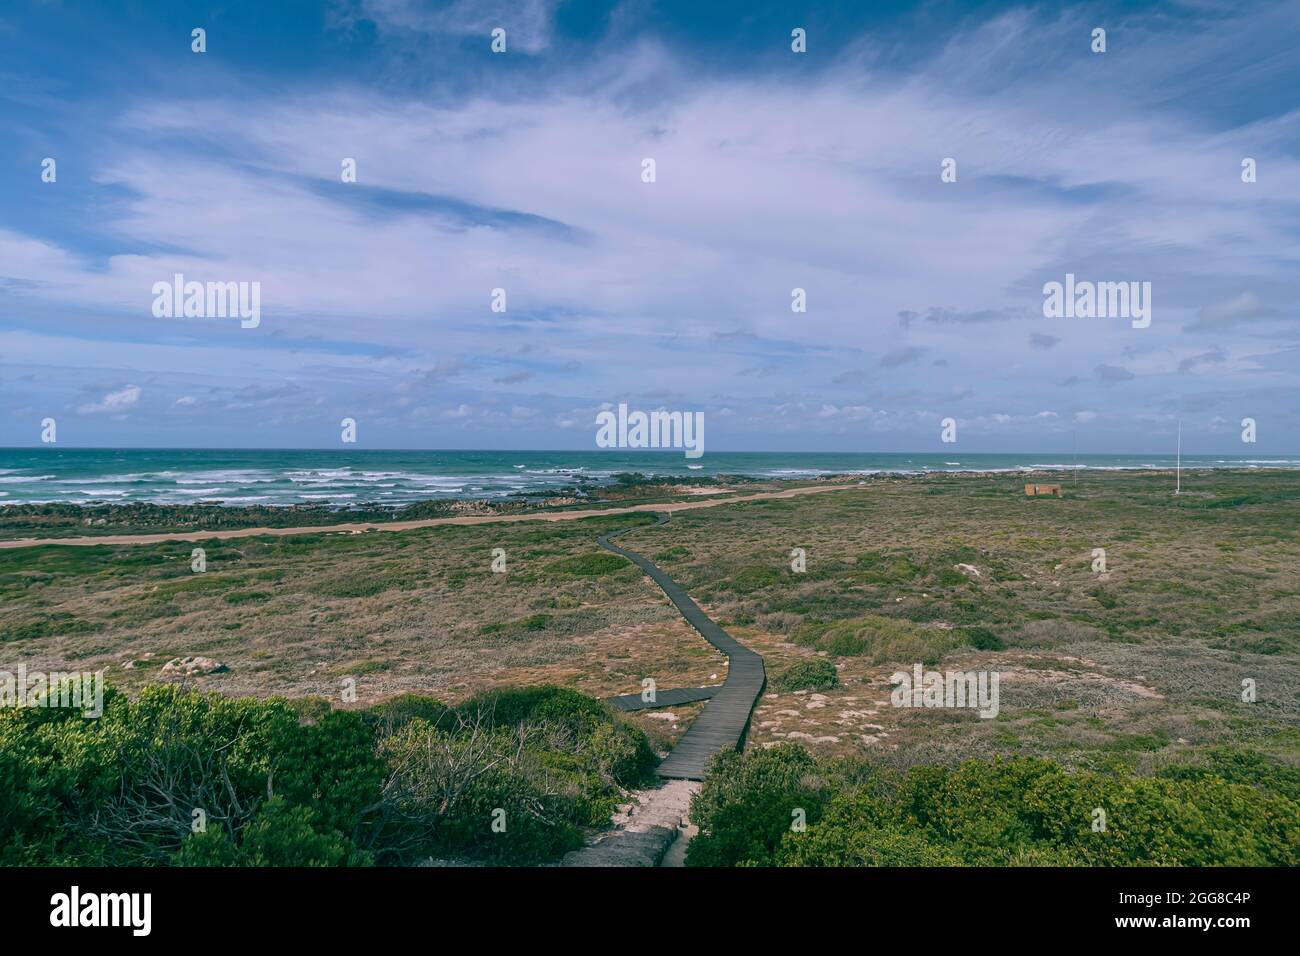 The view of coastal plain with walking plank at Cape Agulhas National Park which is the Africa continent southernmost point in South Africa. Stock Photo